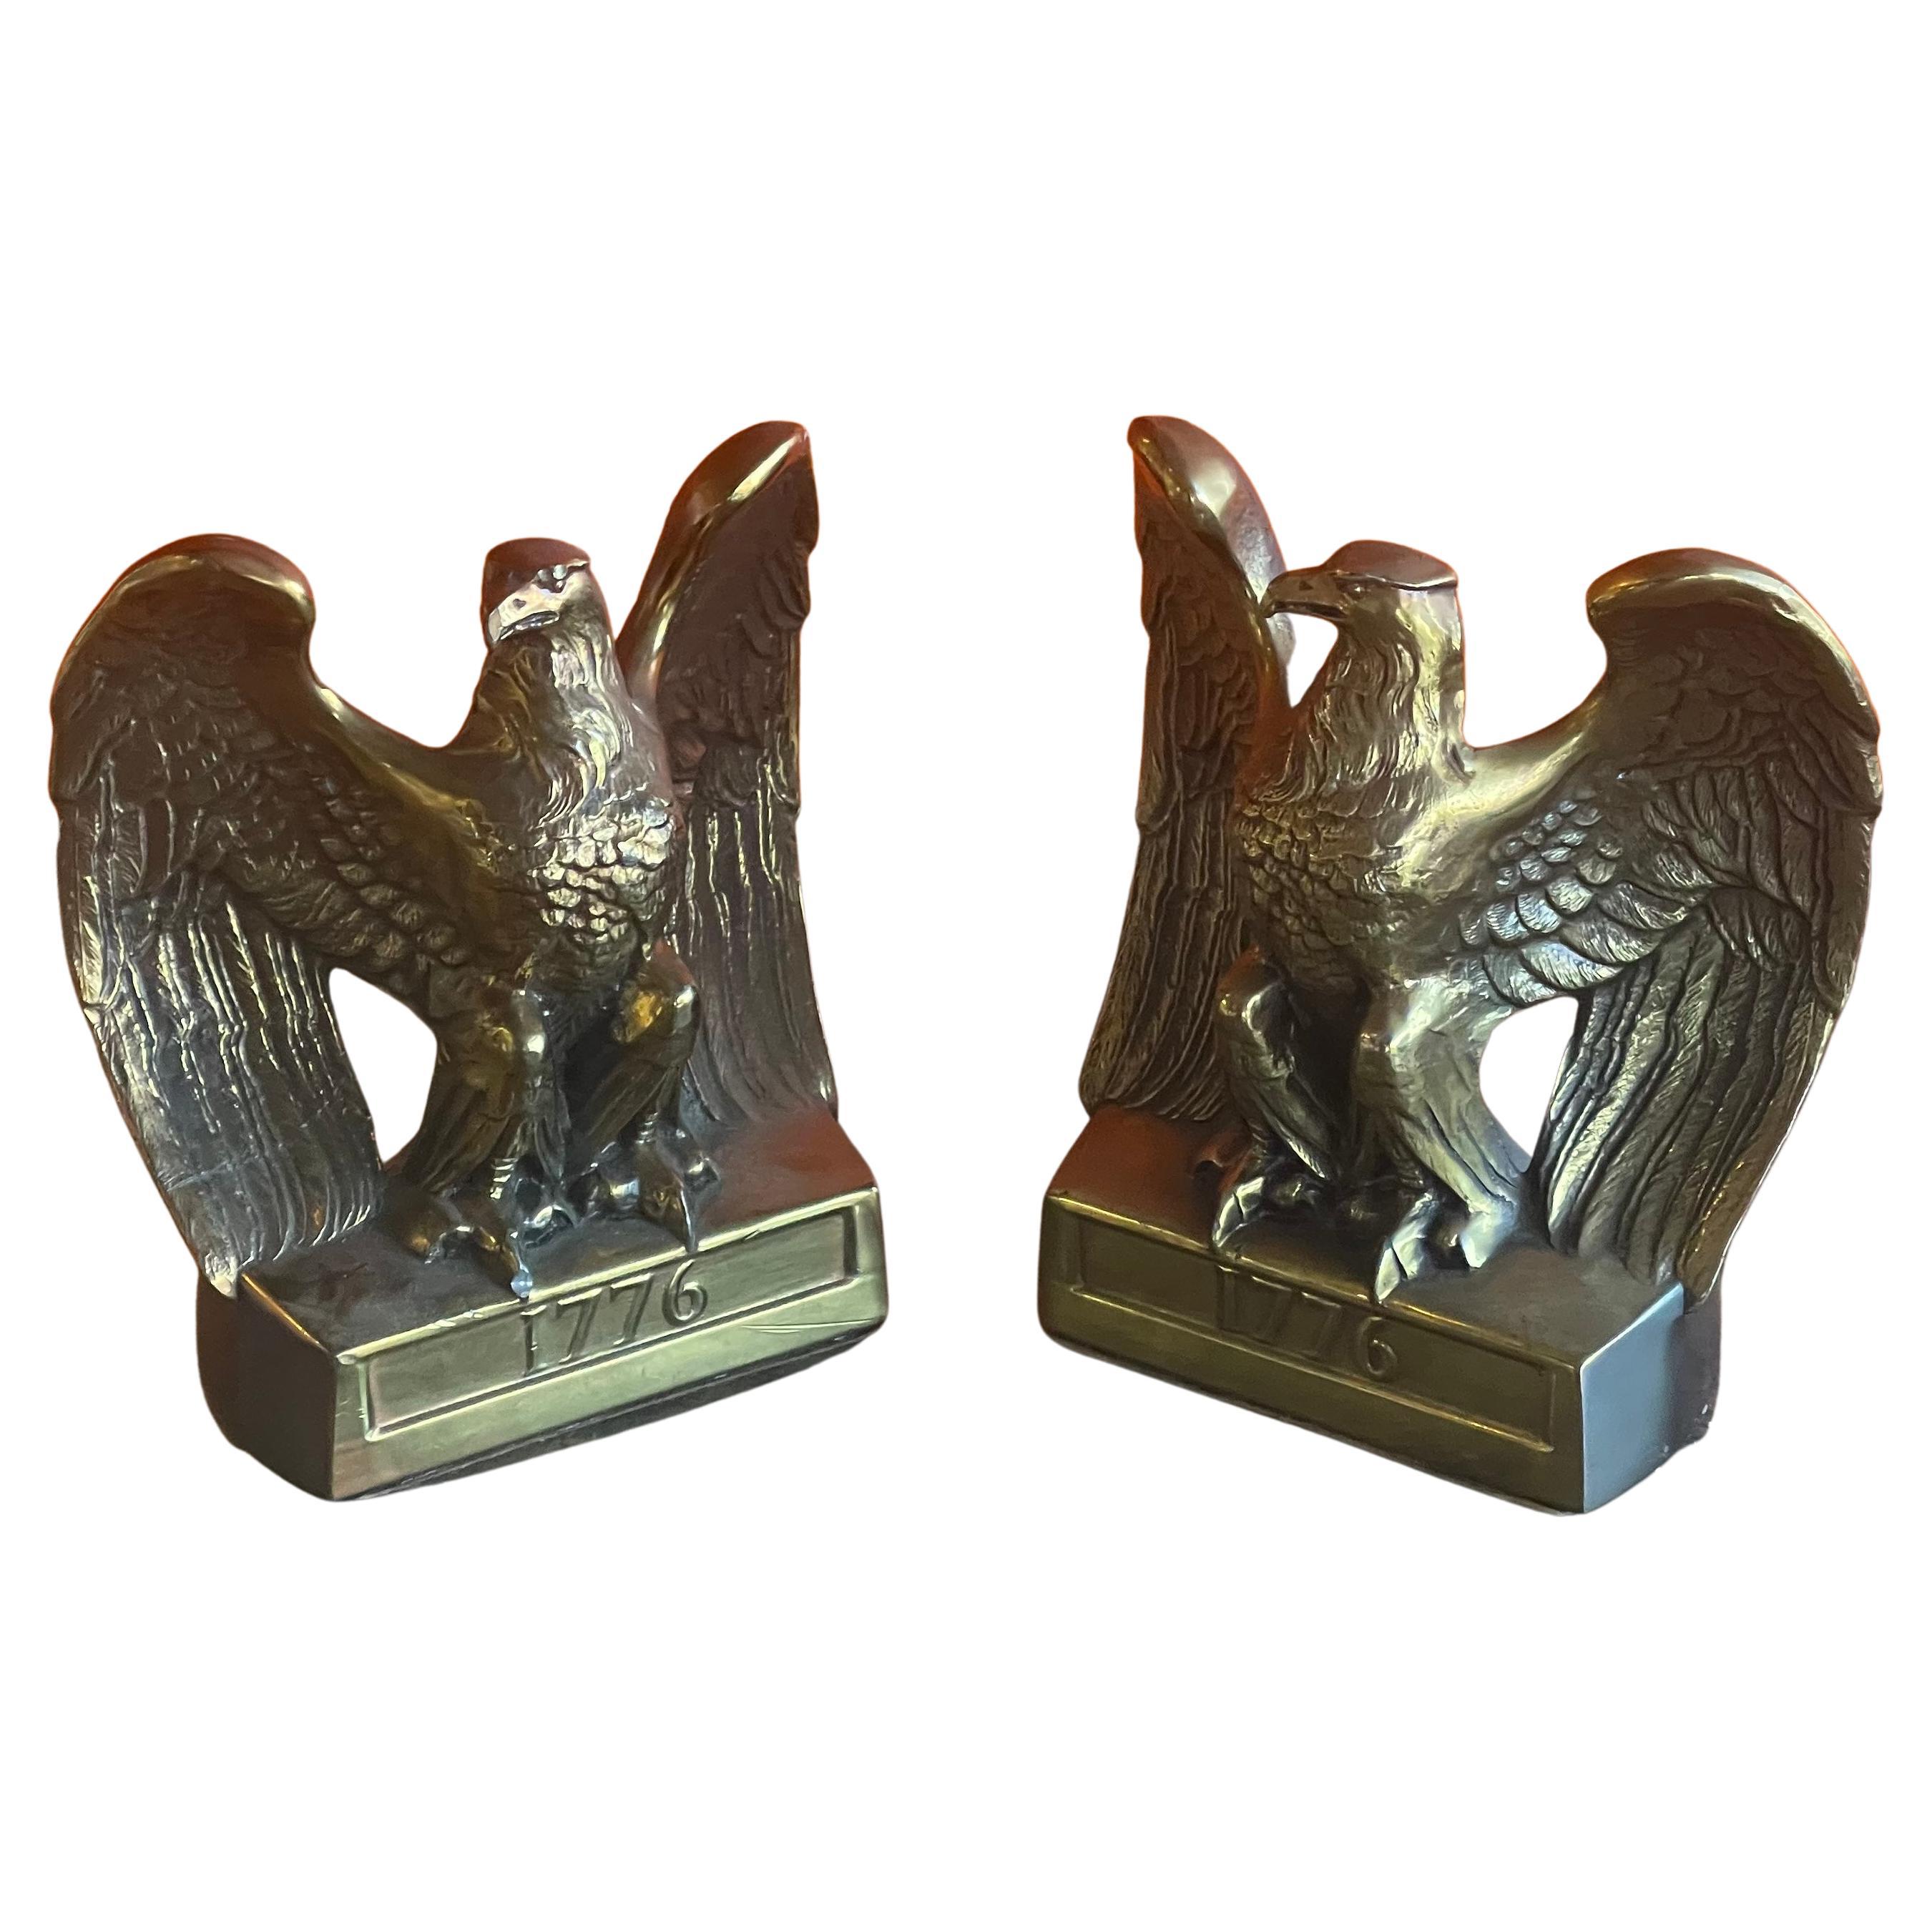 Pair of Brass American Eagle "1776" Bookends by Philadelpha Manufacturing Co. For Sale